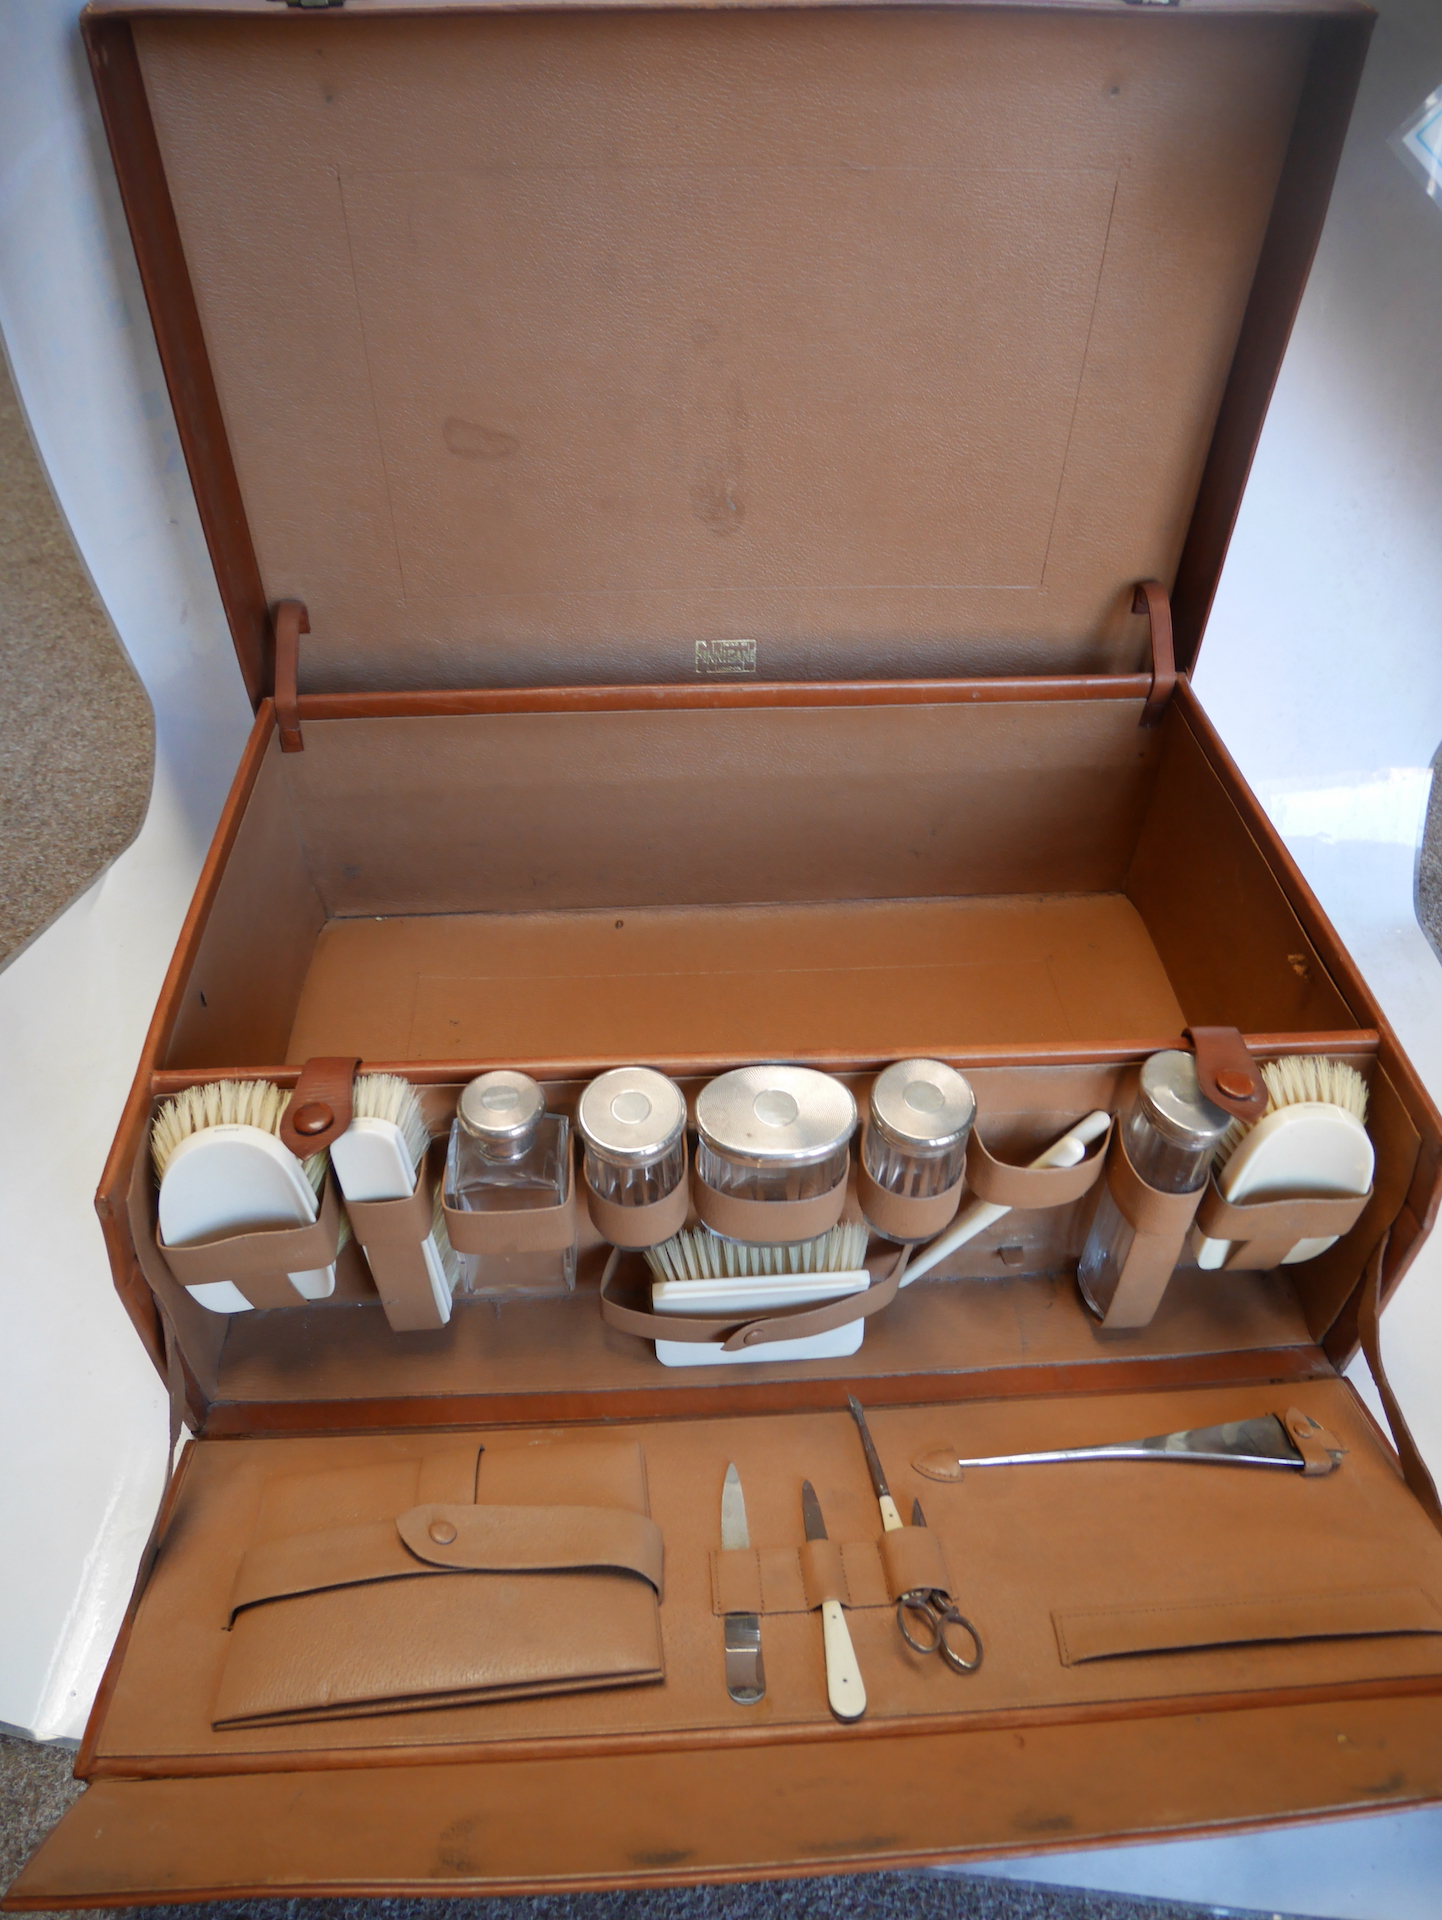 Leather suitcase by " Finnigans Bond Street London " with London silver bottles - Image 4 of 6